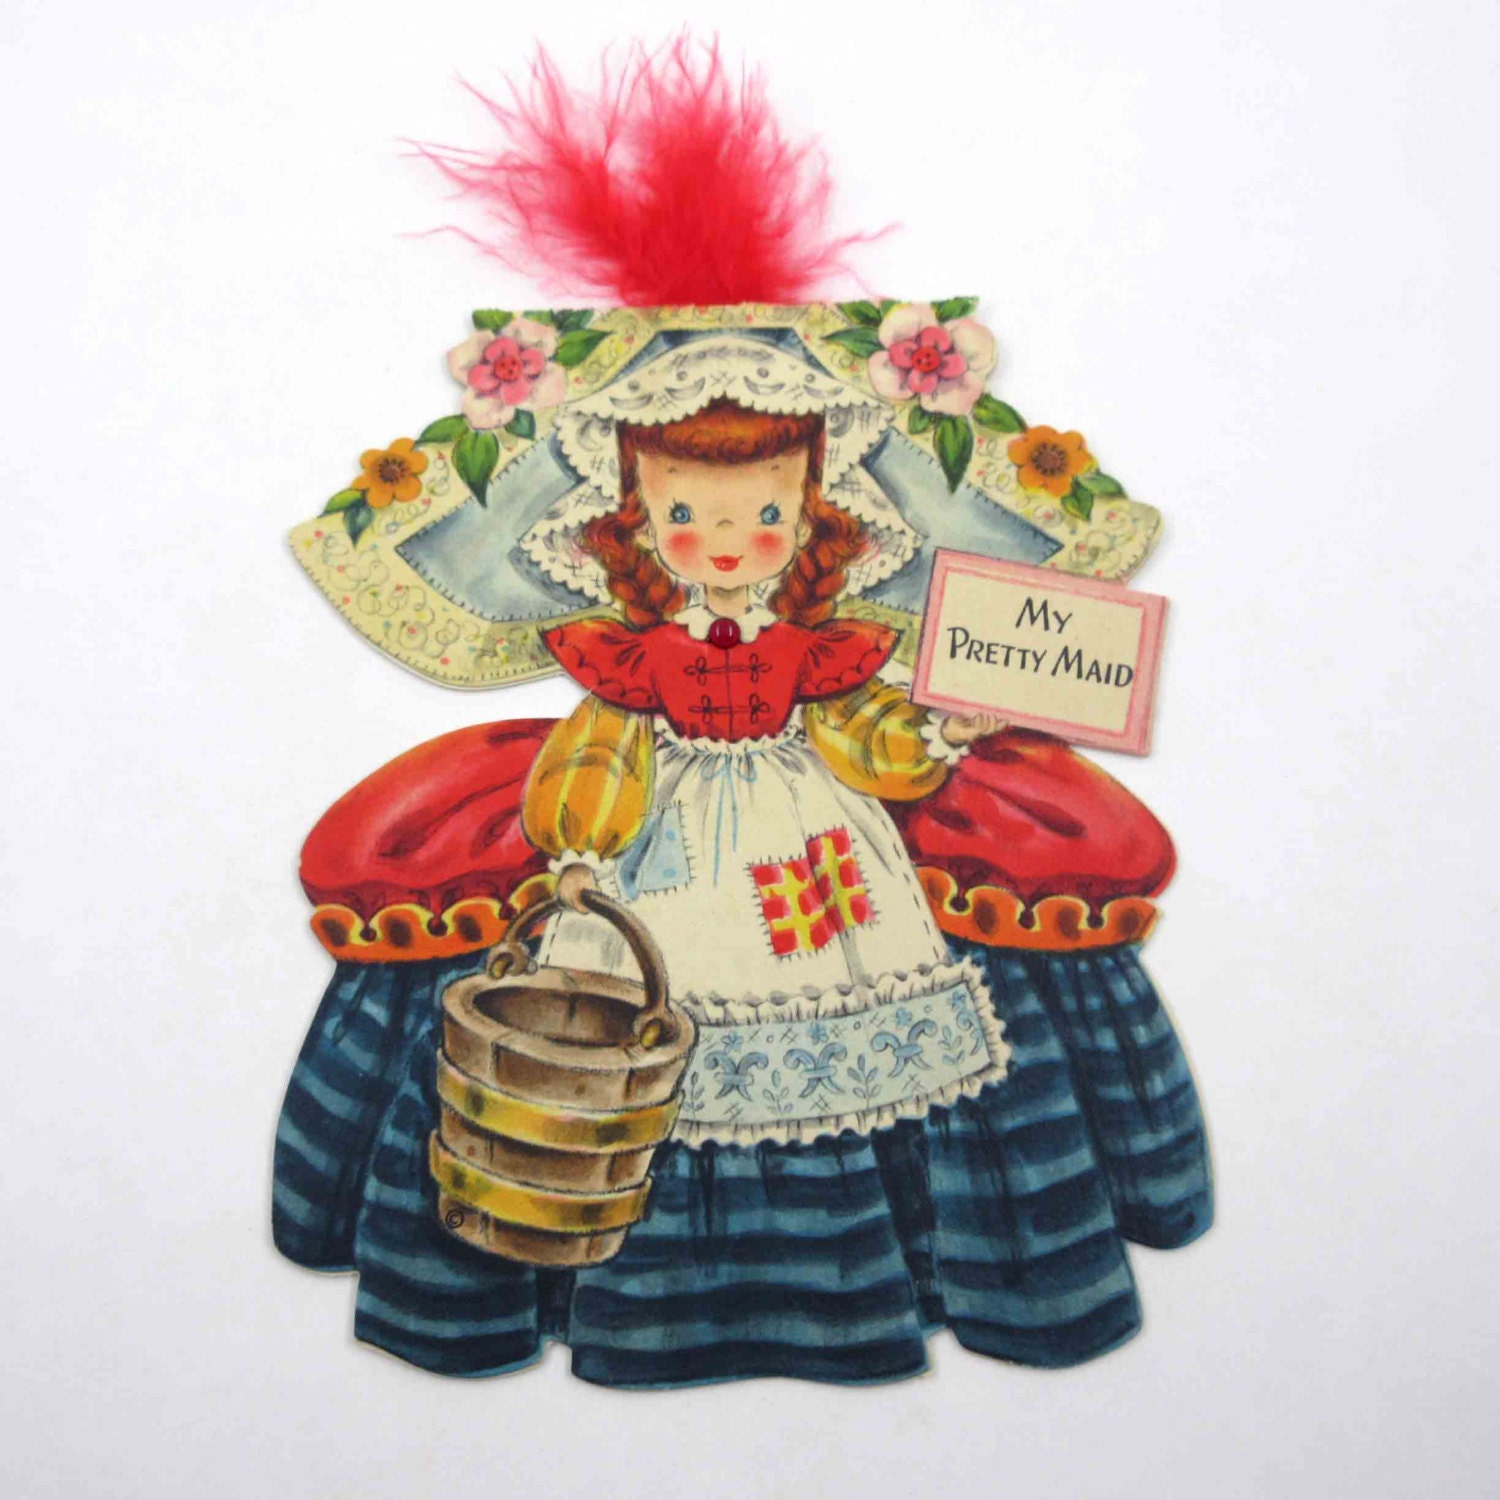 My Pretty Maid Vintage 1940s Greeting Card From Land of Make